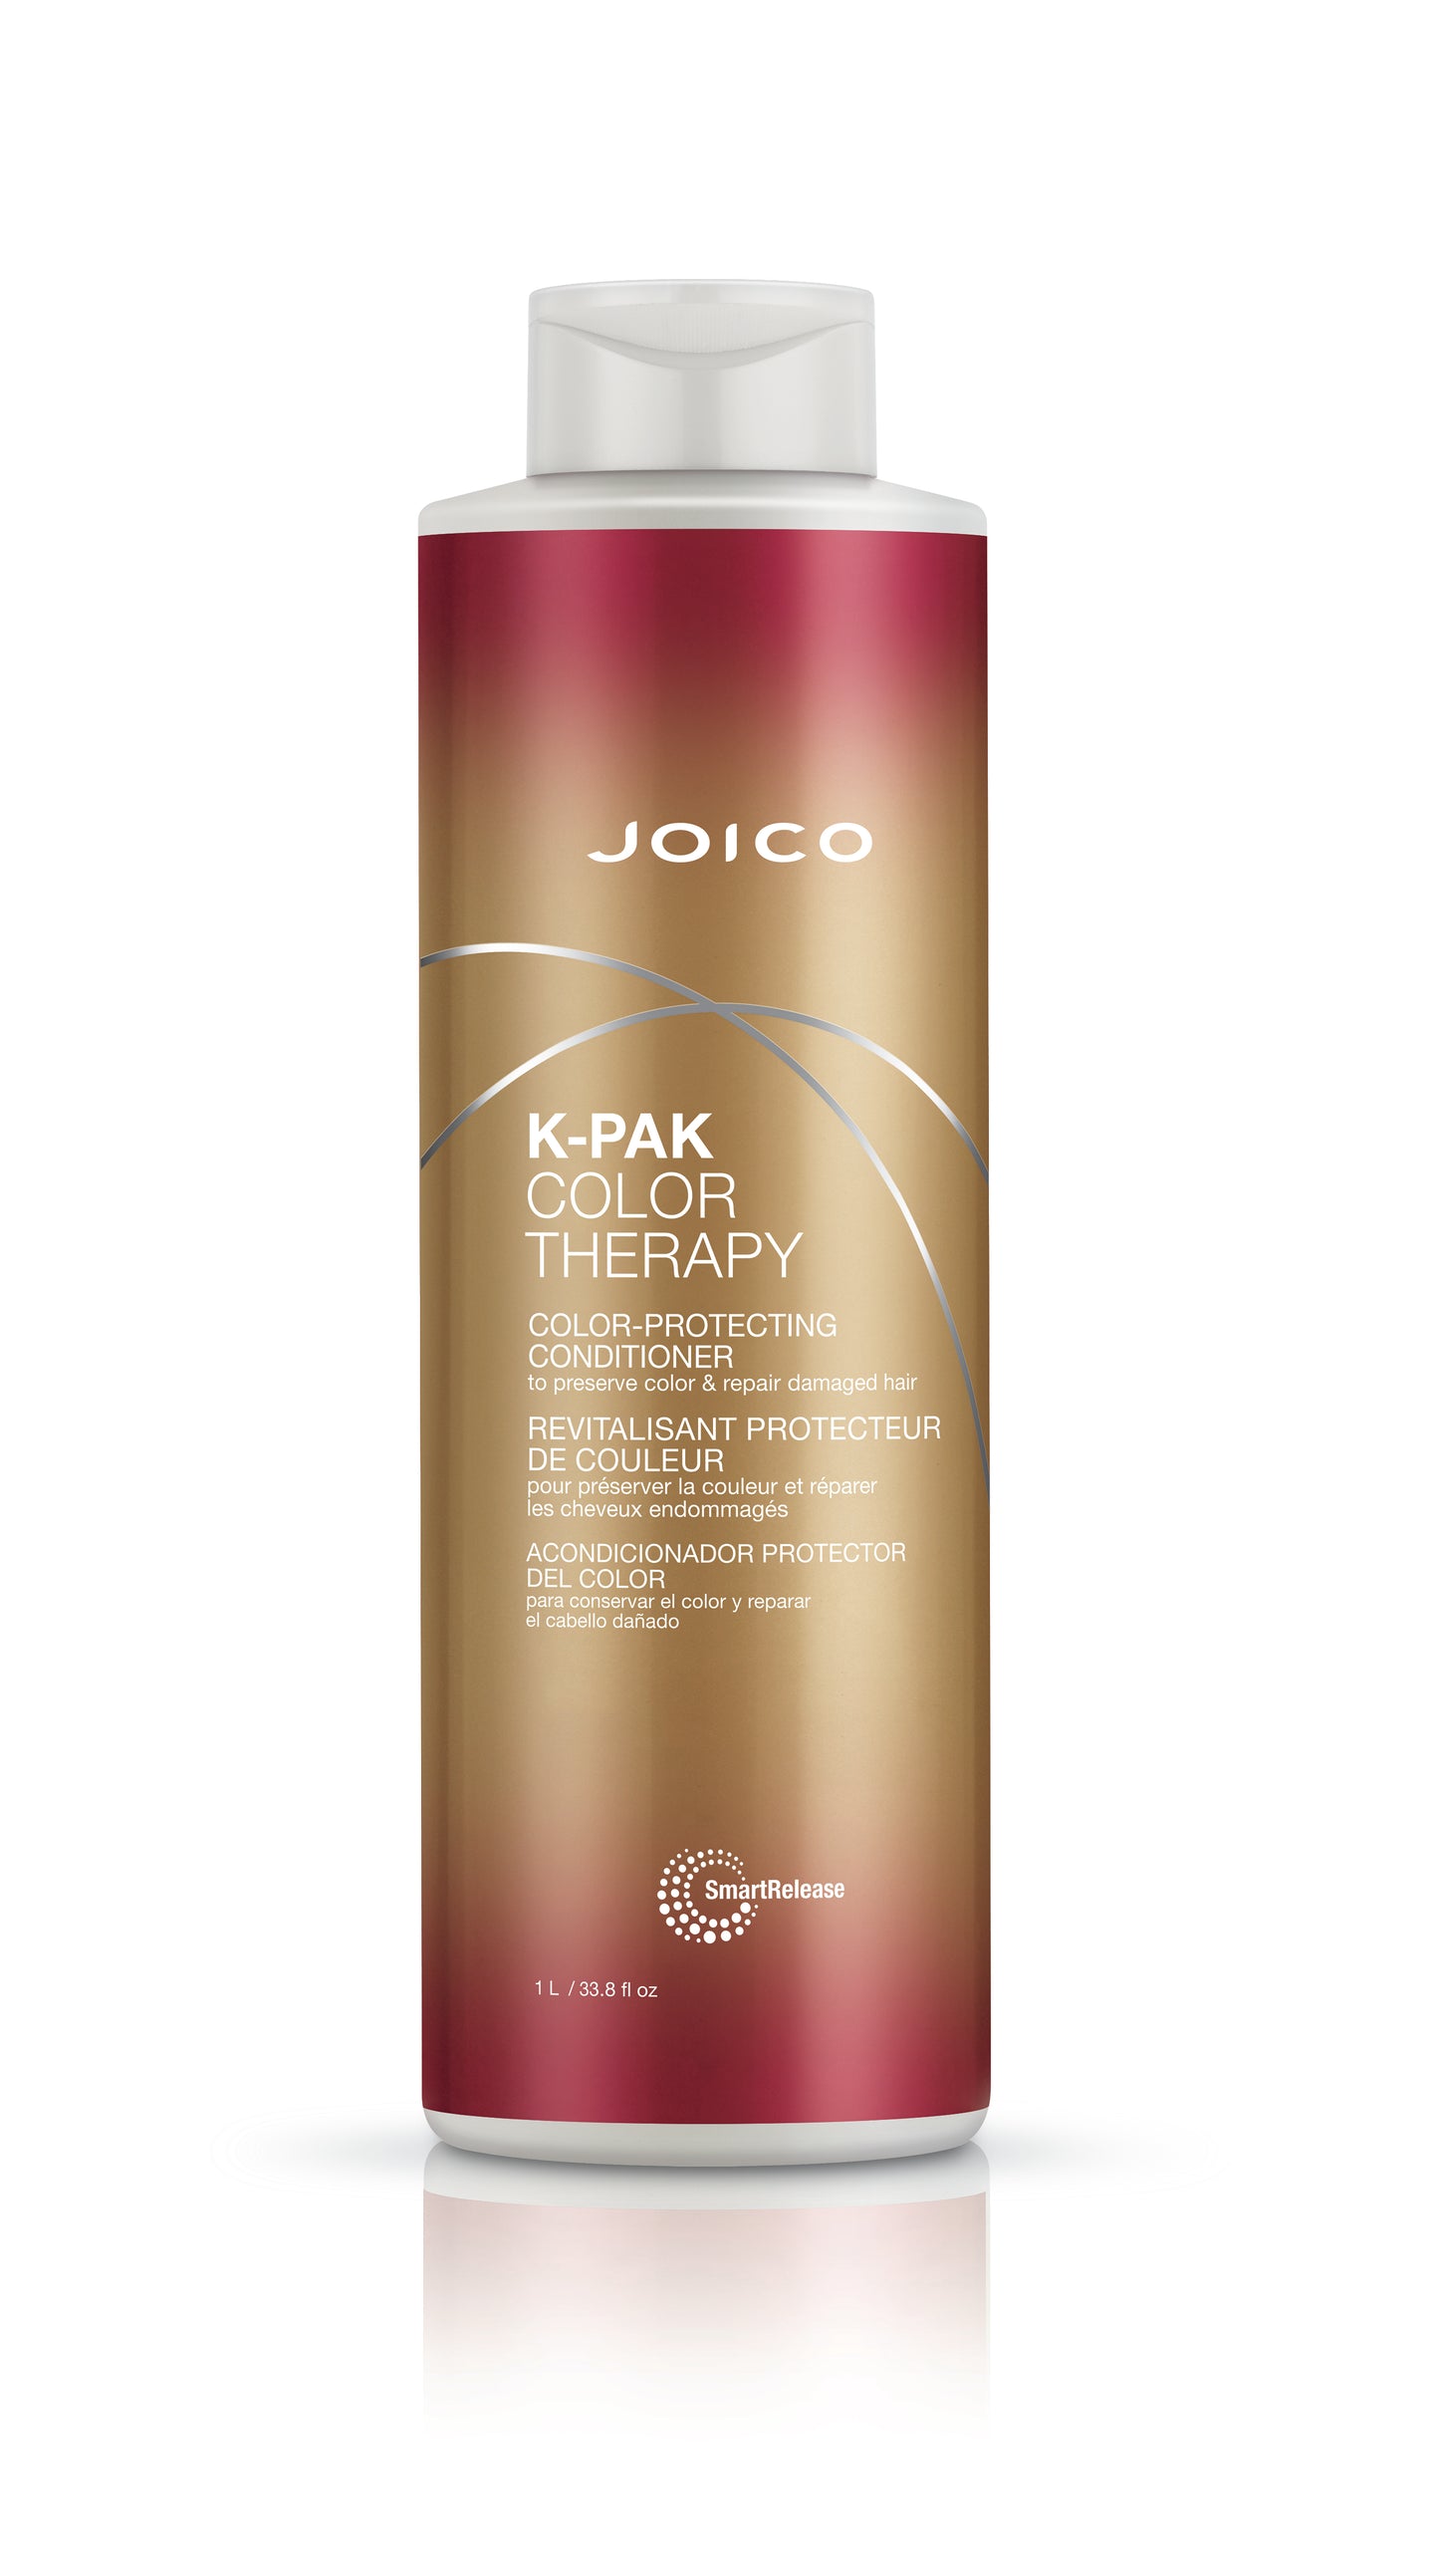 Cond Joico K-PAK Color Therapy Liter